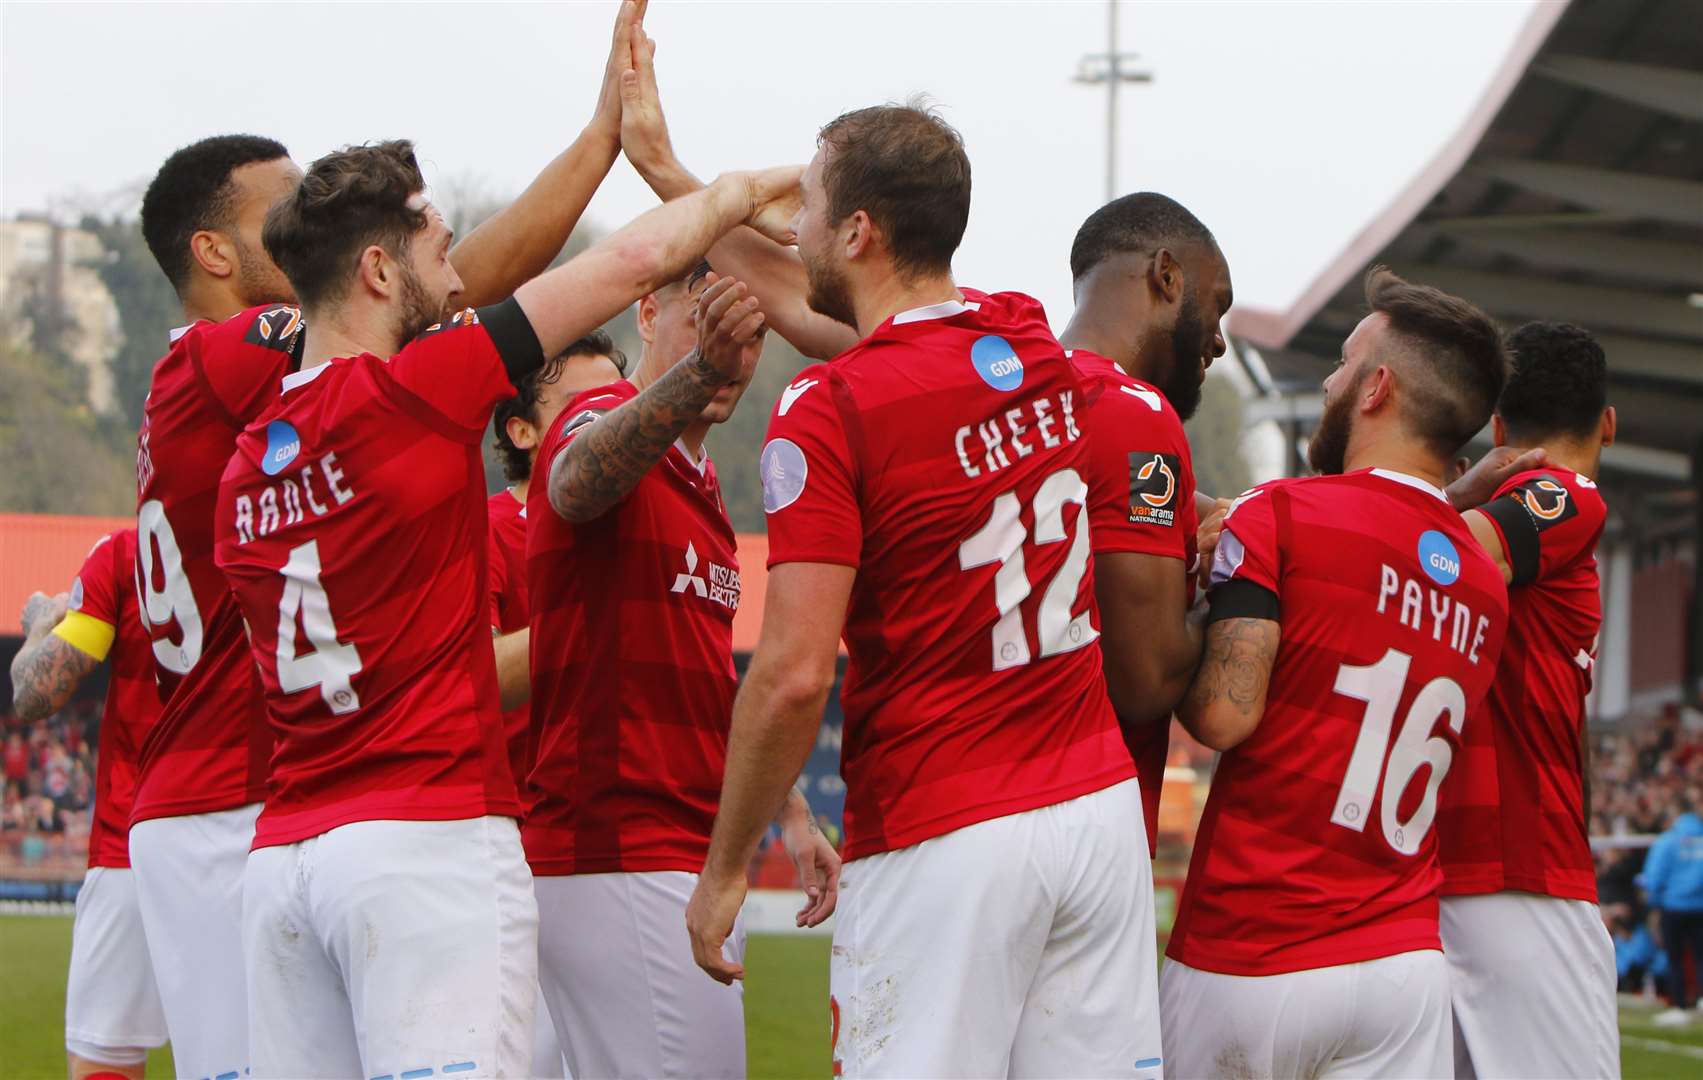 Ebbsfleet United faces being "struck off" by Companies House